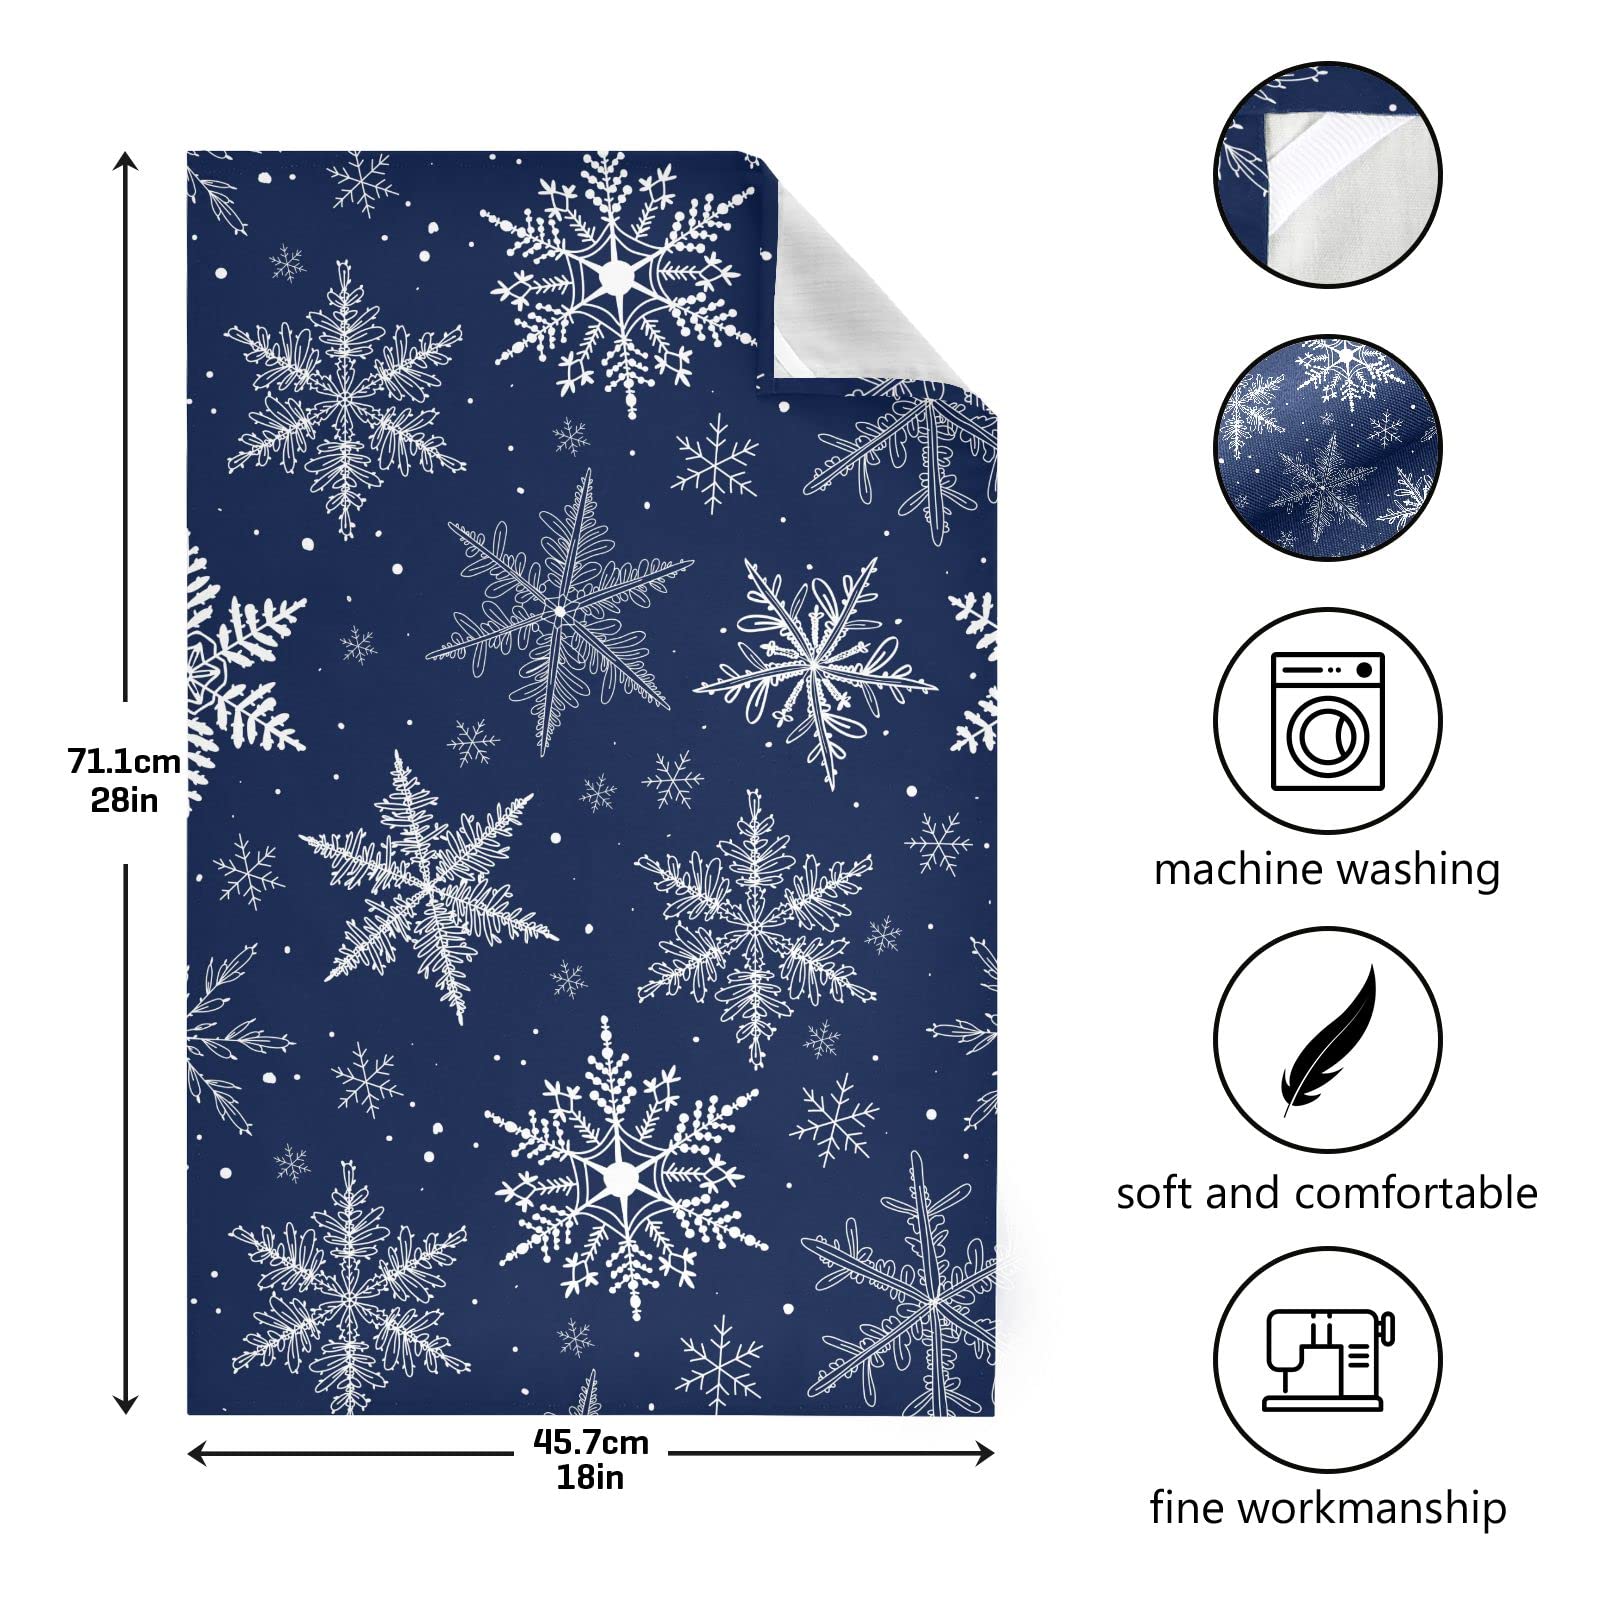 White Snowflakes Winter Doodle Kitchen Dish Towel Set of 4, Blue Christmas 18x28in Absorbent Dishcloth Reusable Cleaning Cloths for Household Use